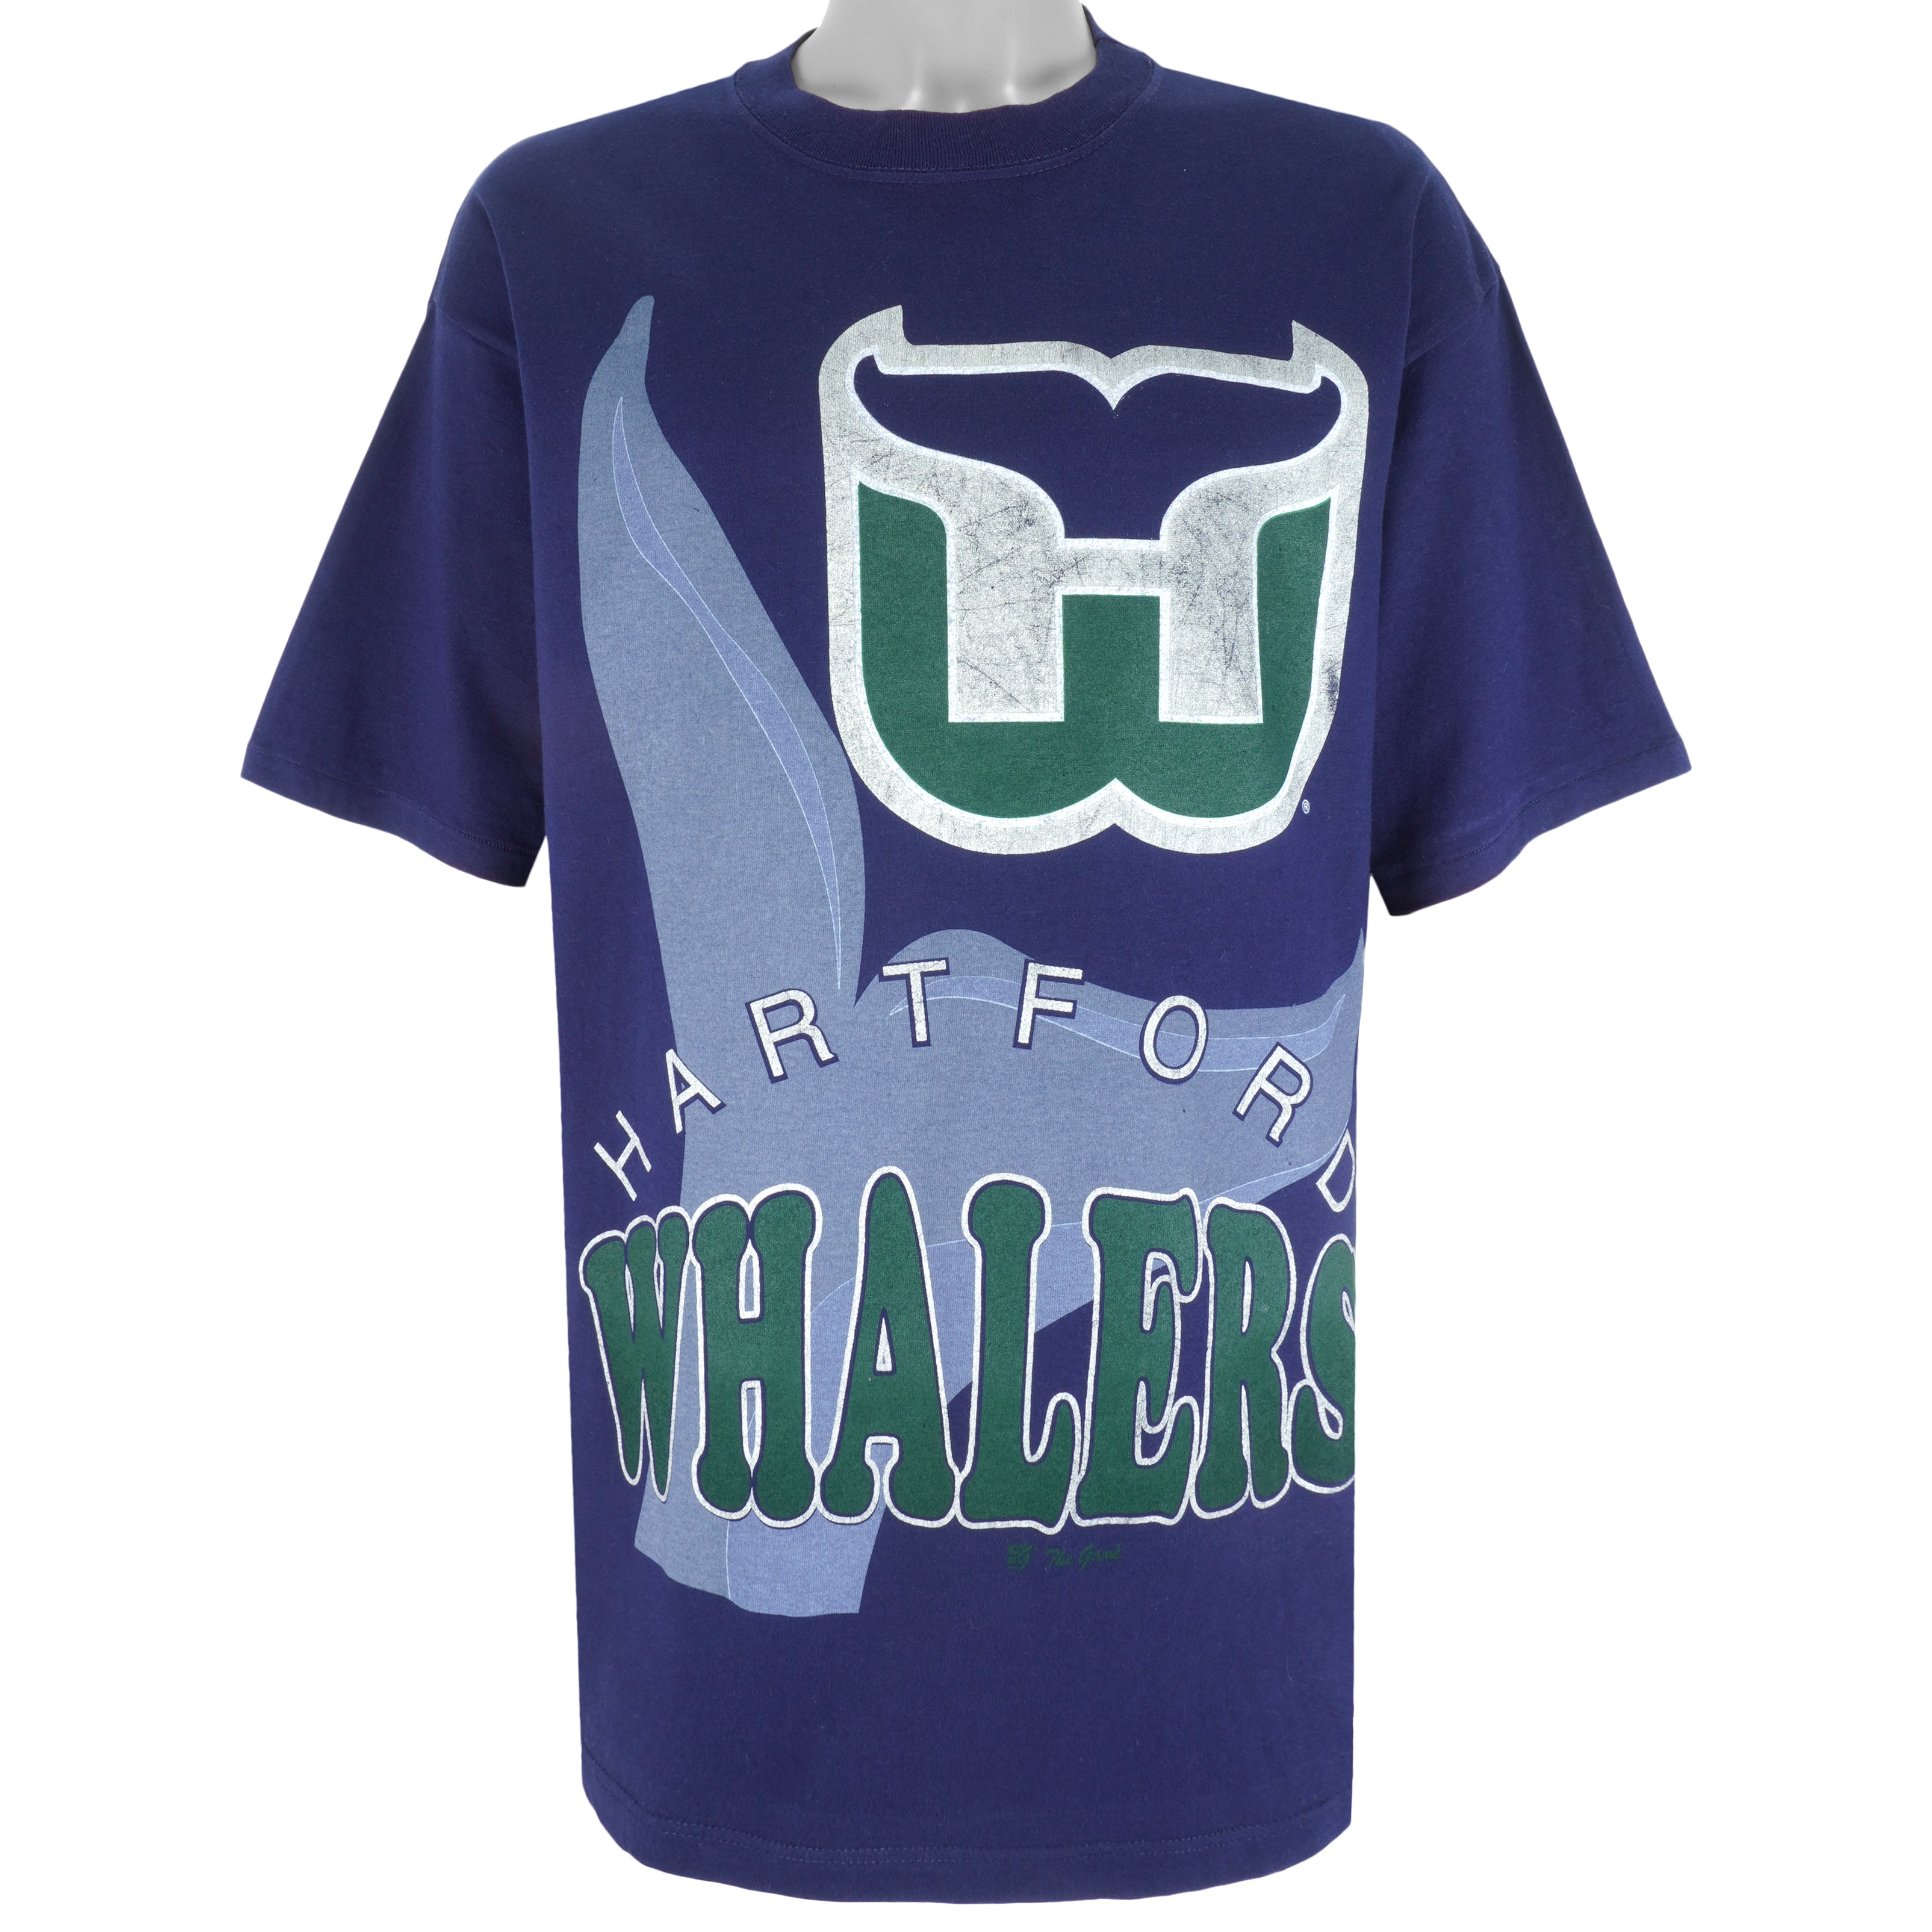 Vintage NHL (The Game) - Hartford Whalers Spell-Out T-Shirt 1990s